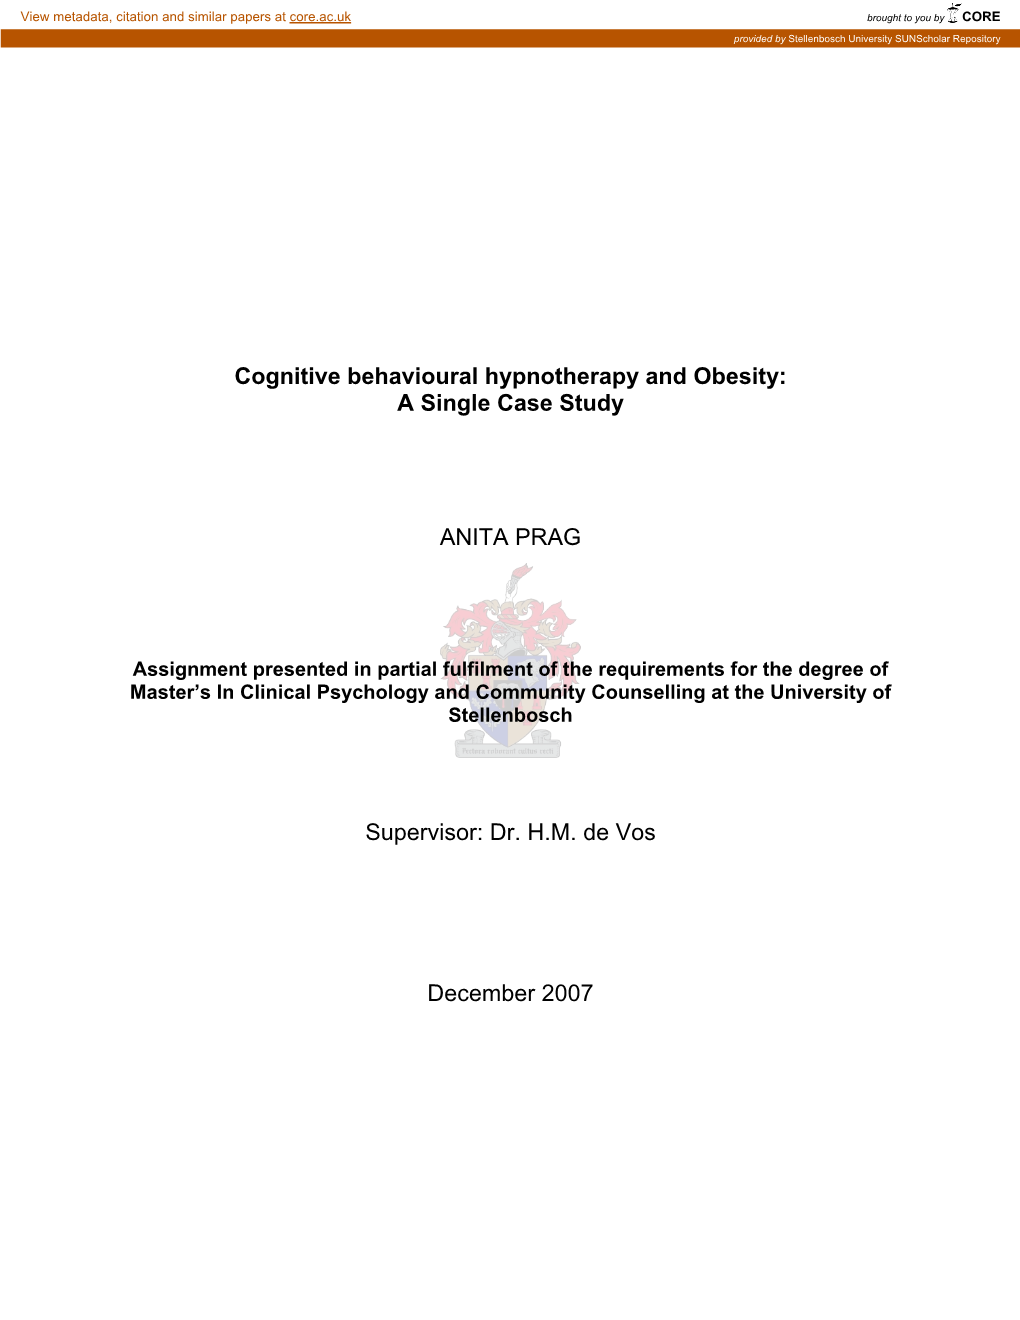 Cognitive Behavioural Hypnotherapy and Obesity: a Single Case Study